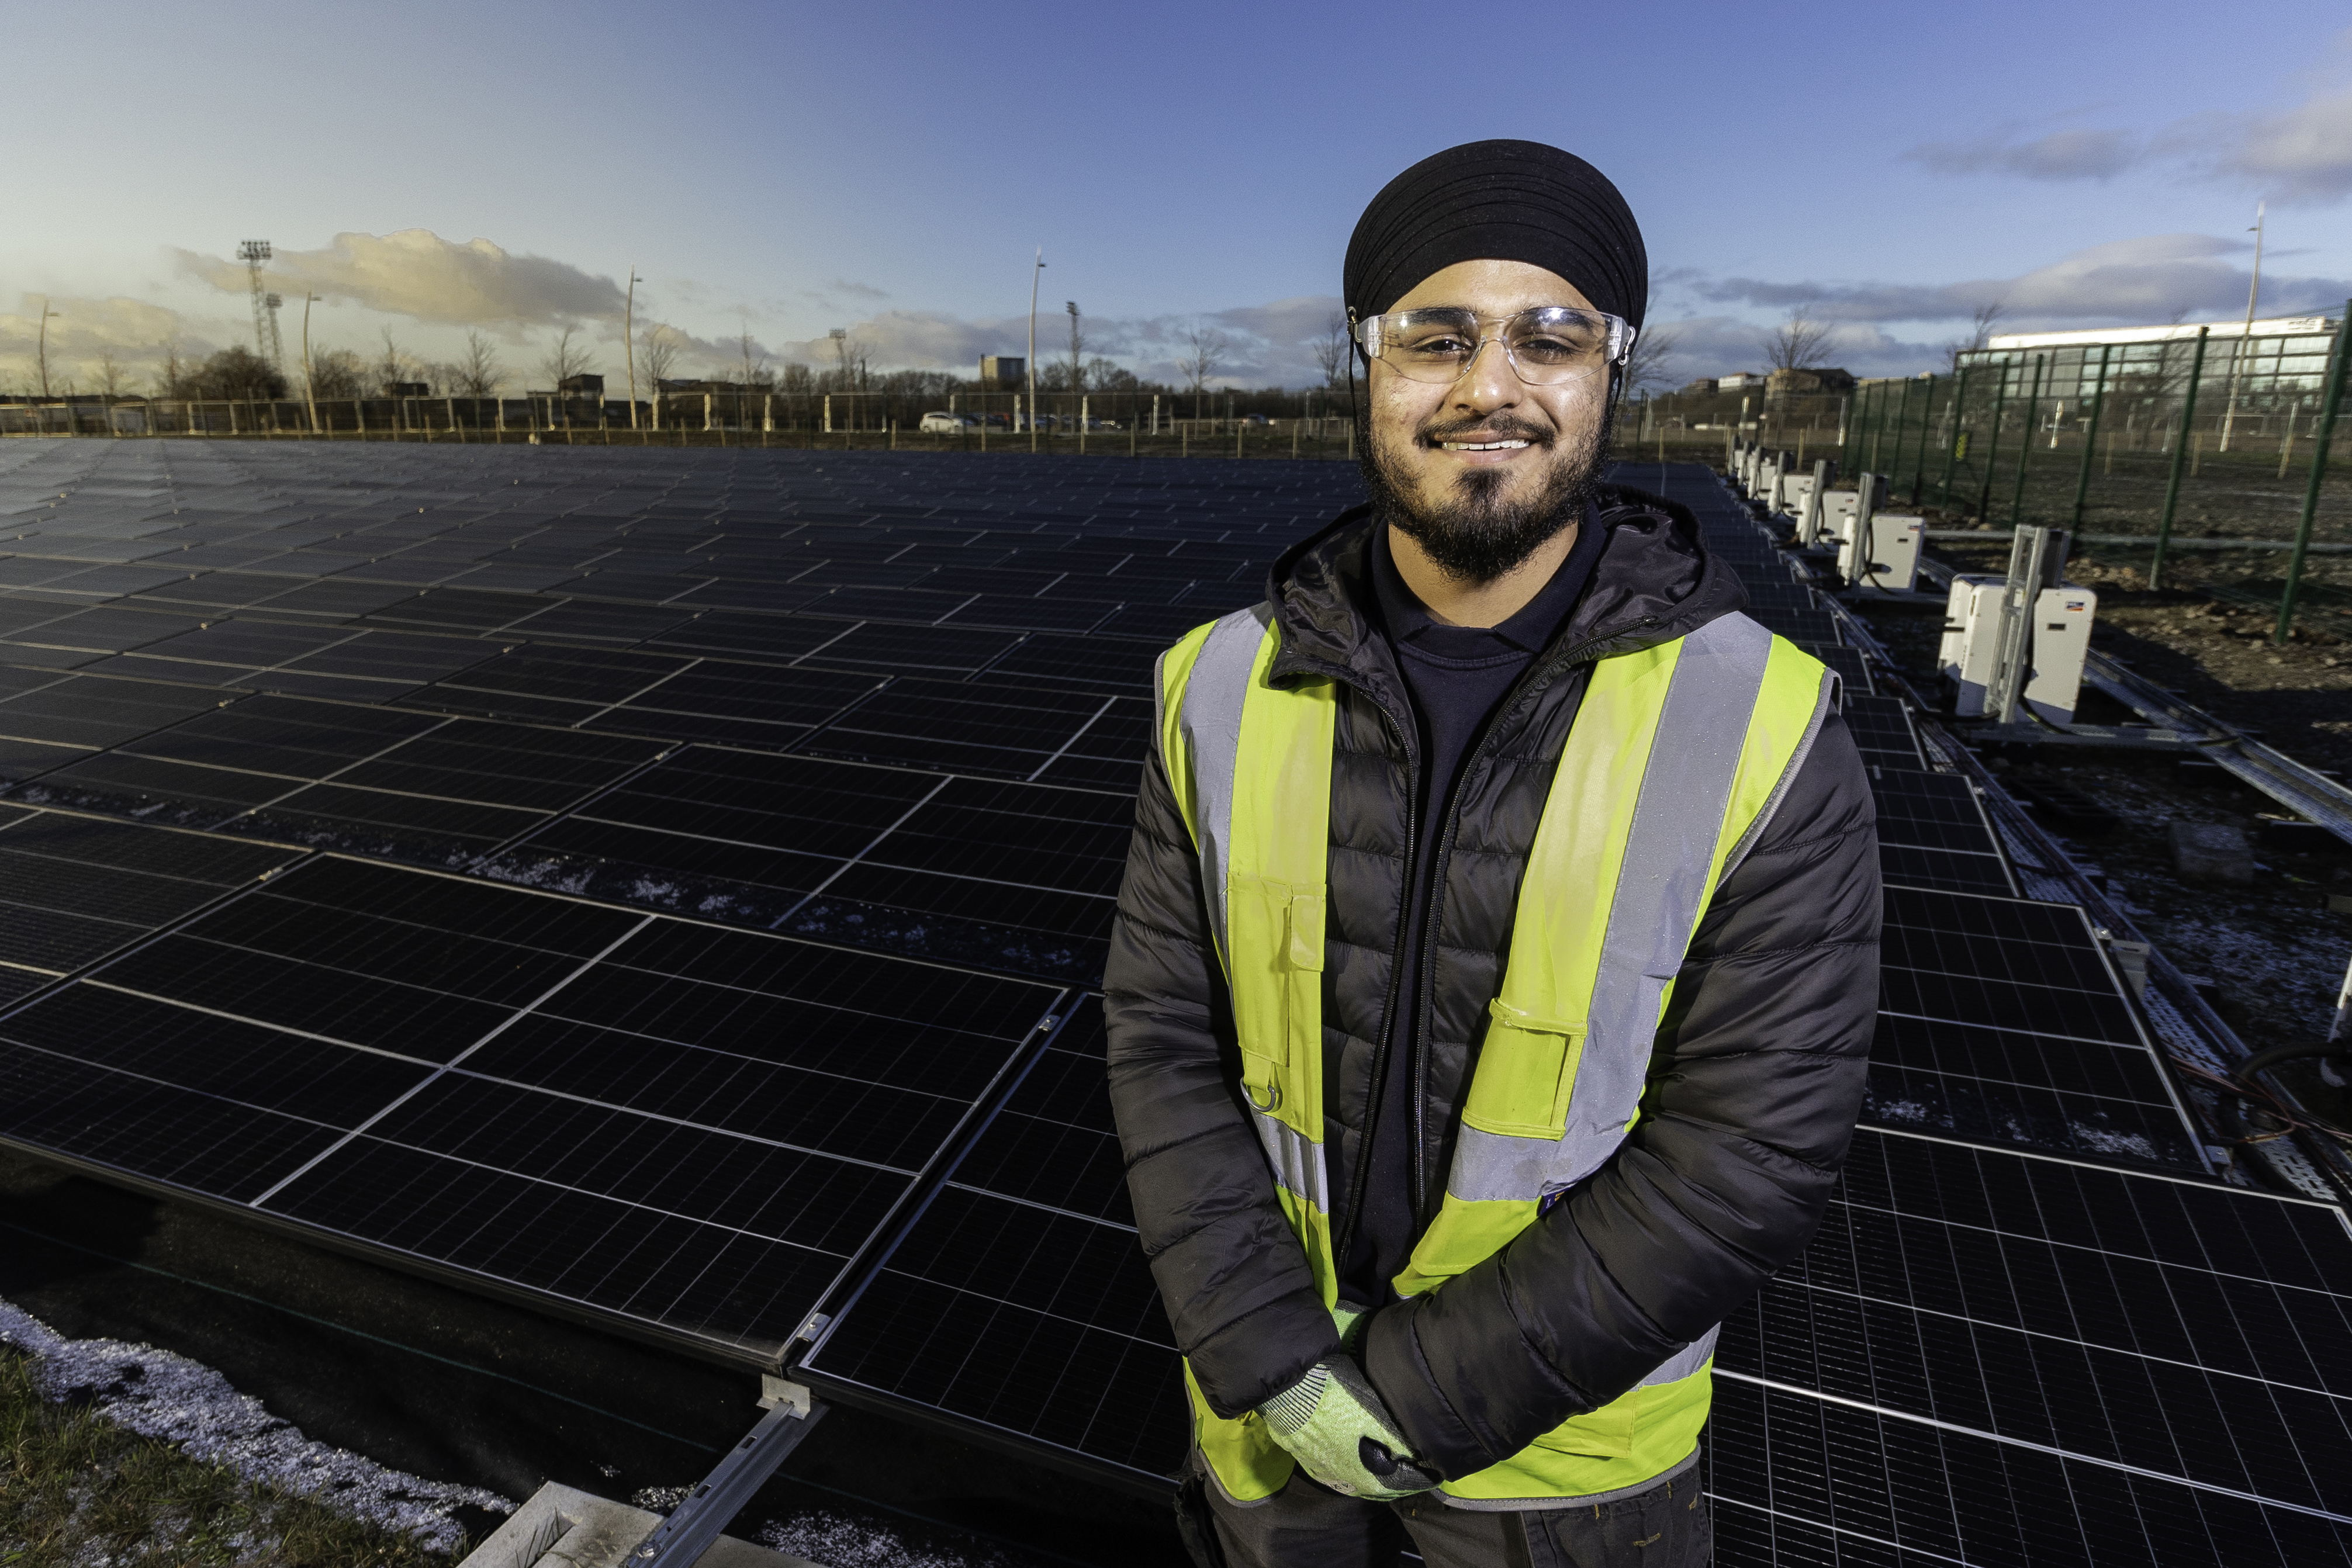 Mandeep smiles to camera, wearing safety goggles, a high vis vest over black work clothes. He stands in front of a field of solar panels